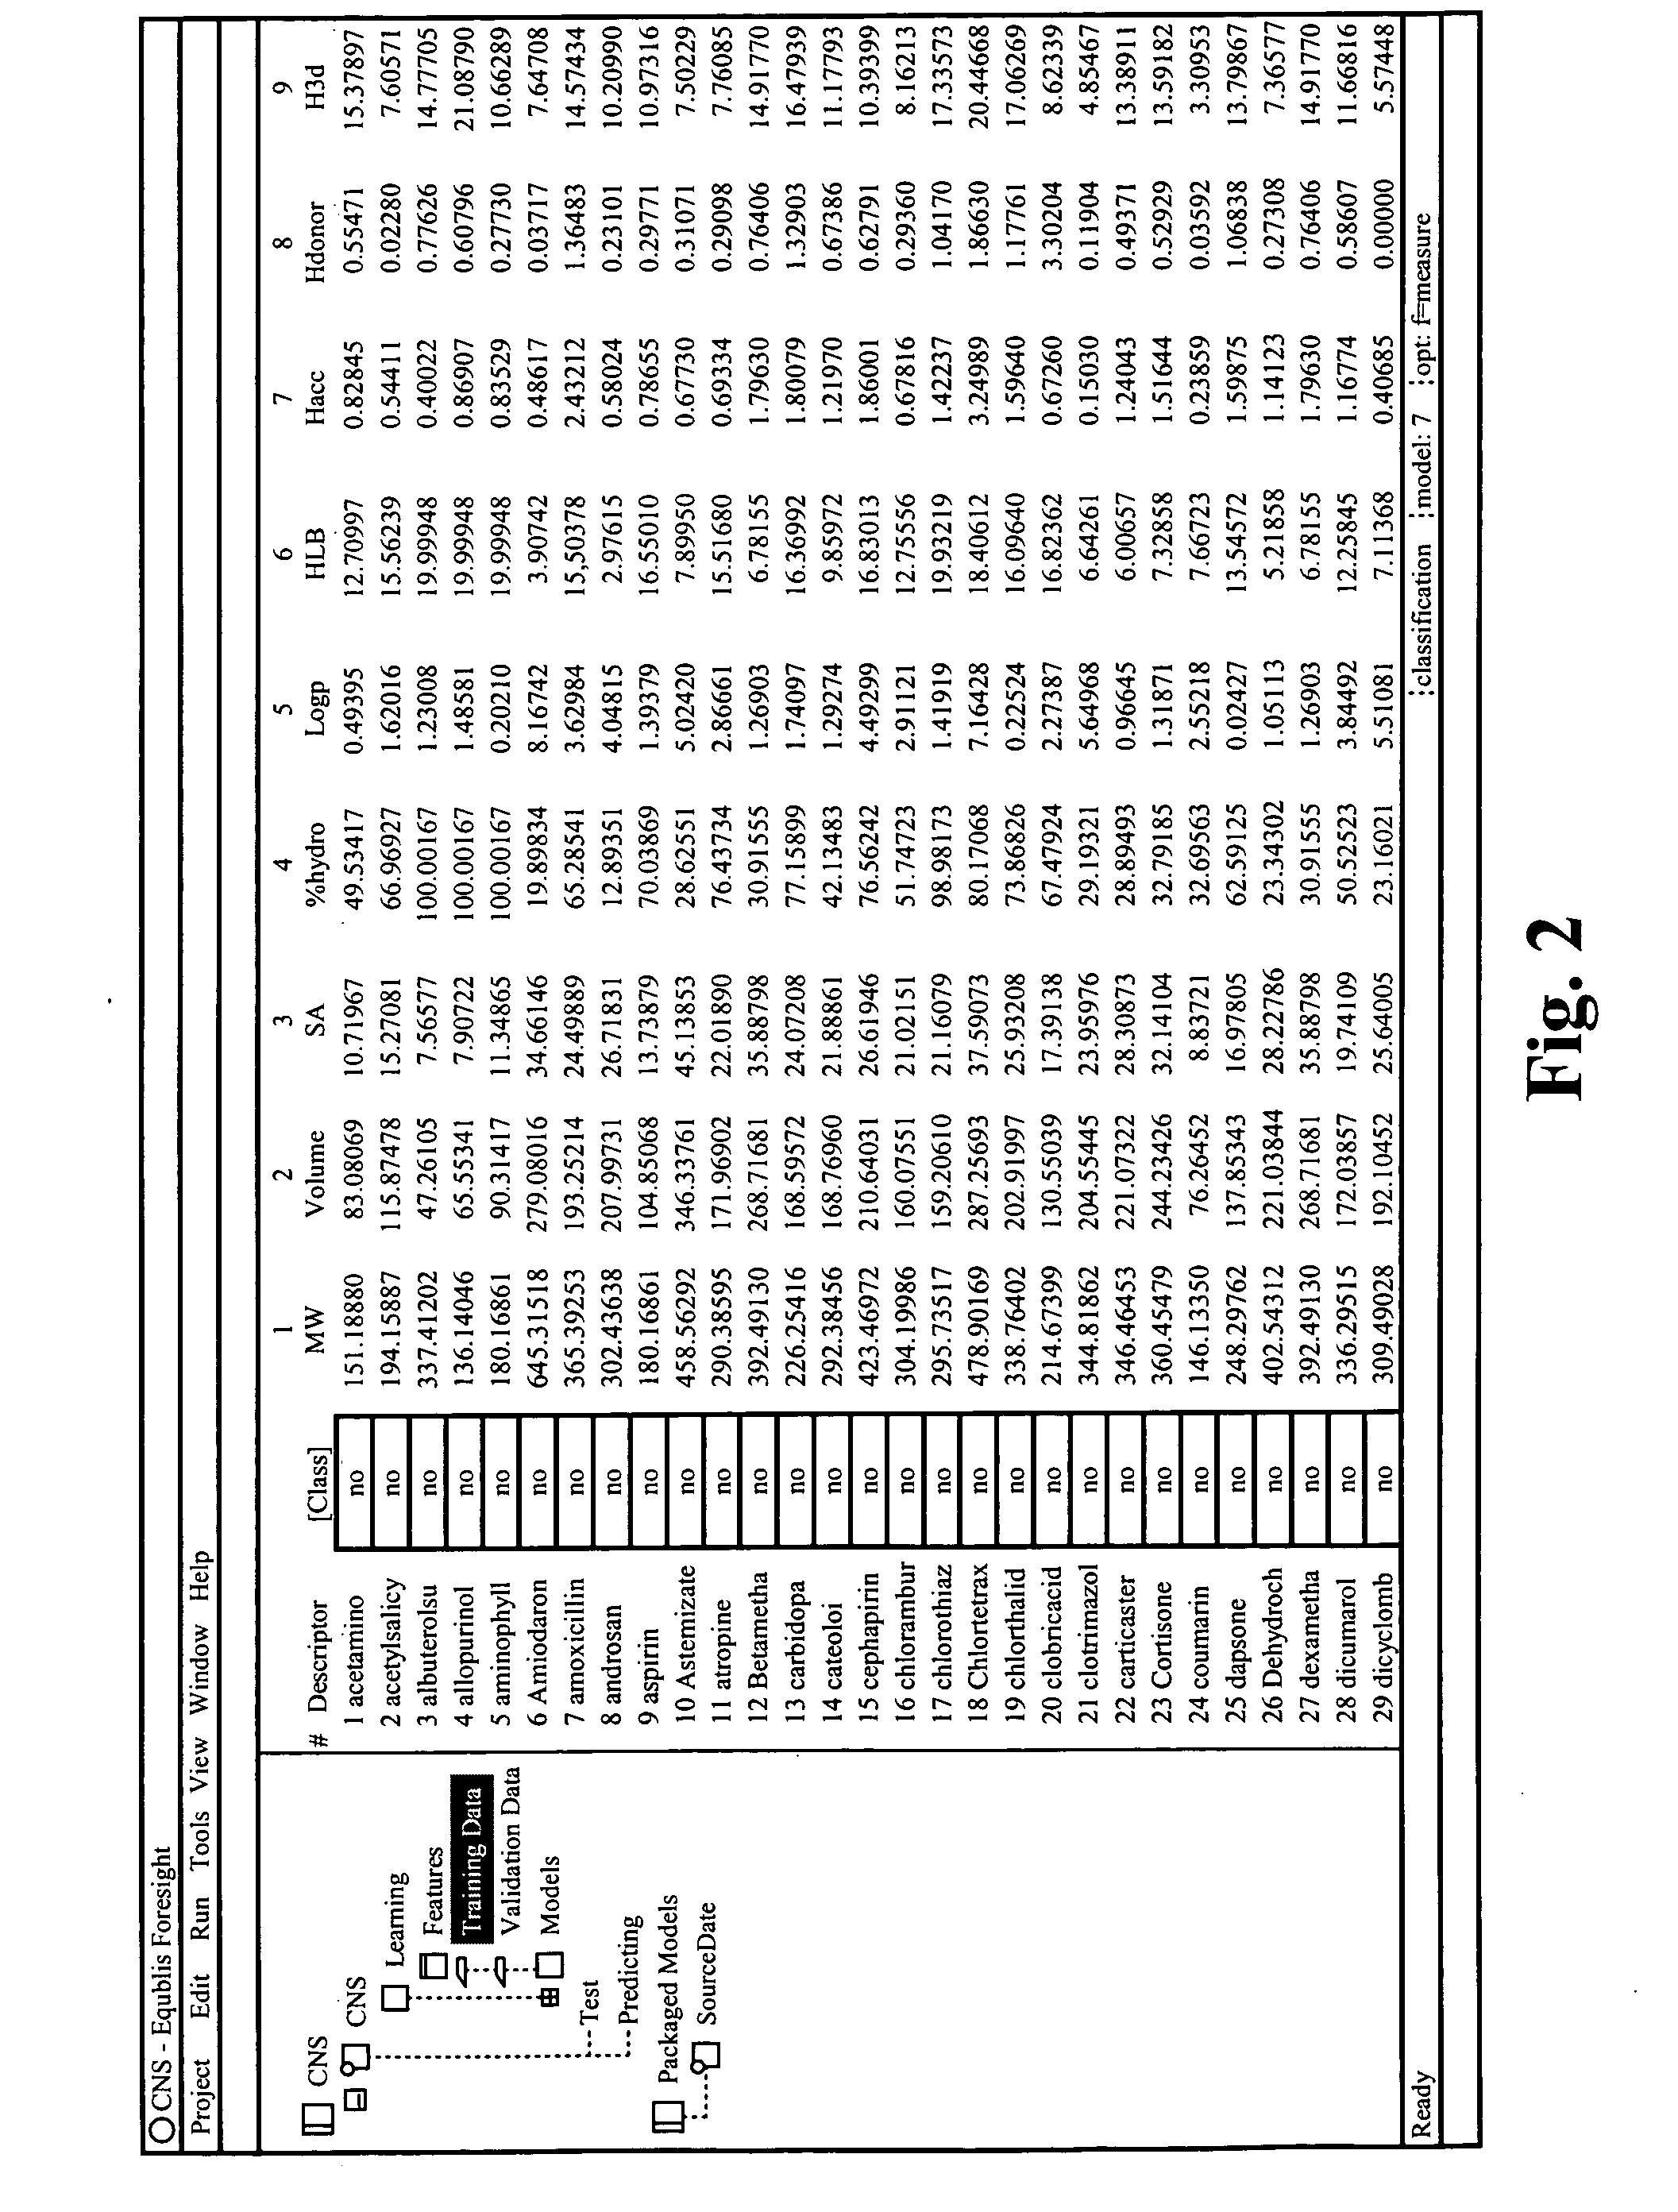 Method and apparatus for predictive modeling & analysis for knowledge discovery